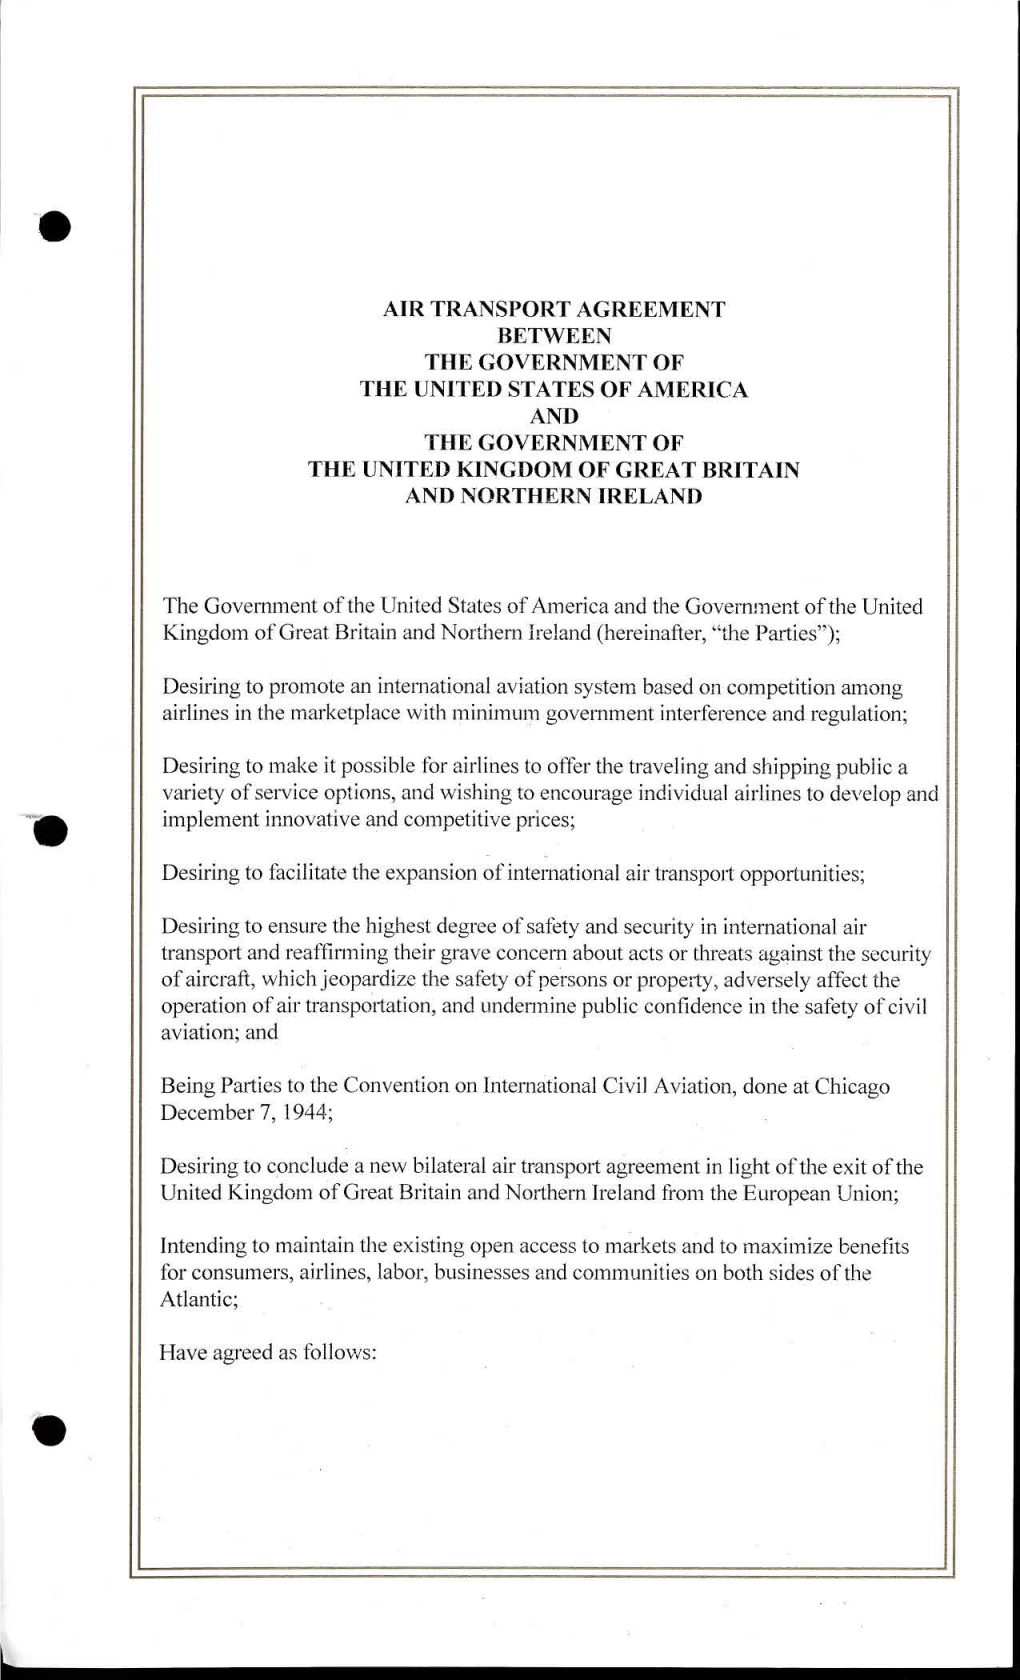 AIR TRANSPORT AGREEMENT BETWEEN the GOVERNMENT of Tile UNITED STATES of AMERICA and the GOVERNMENT of the UNITED KINGDOM of GREAT BRITAIN and NORTHERN IRELAND